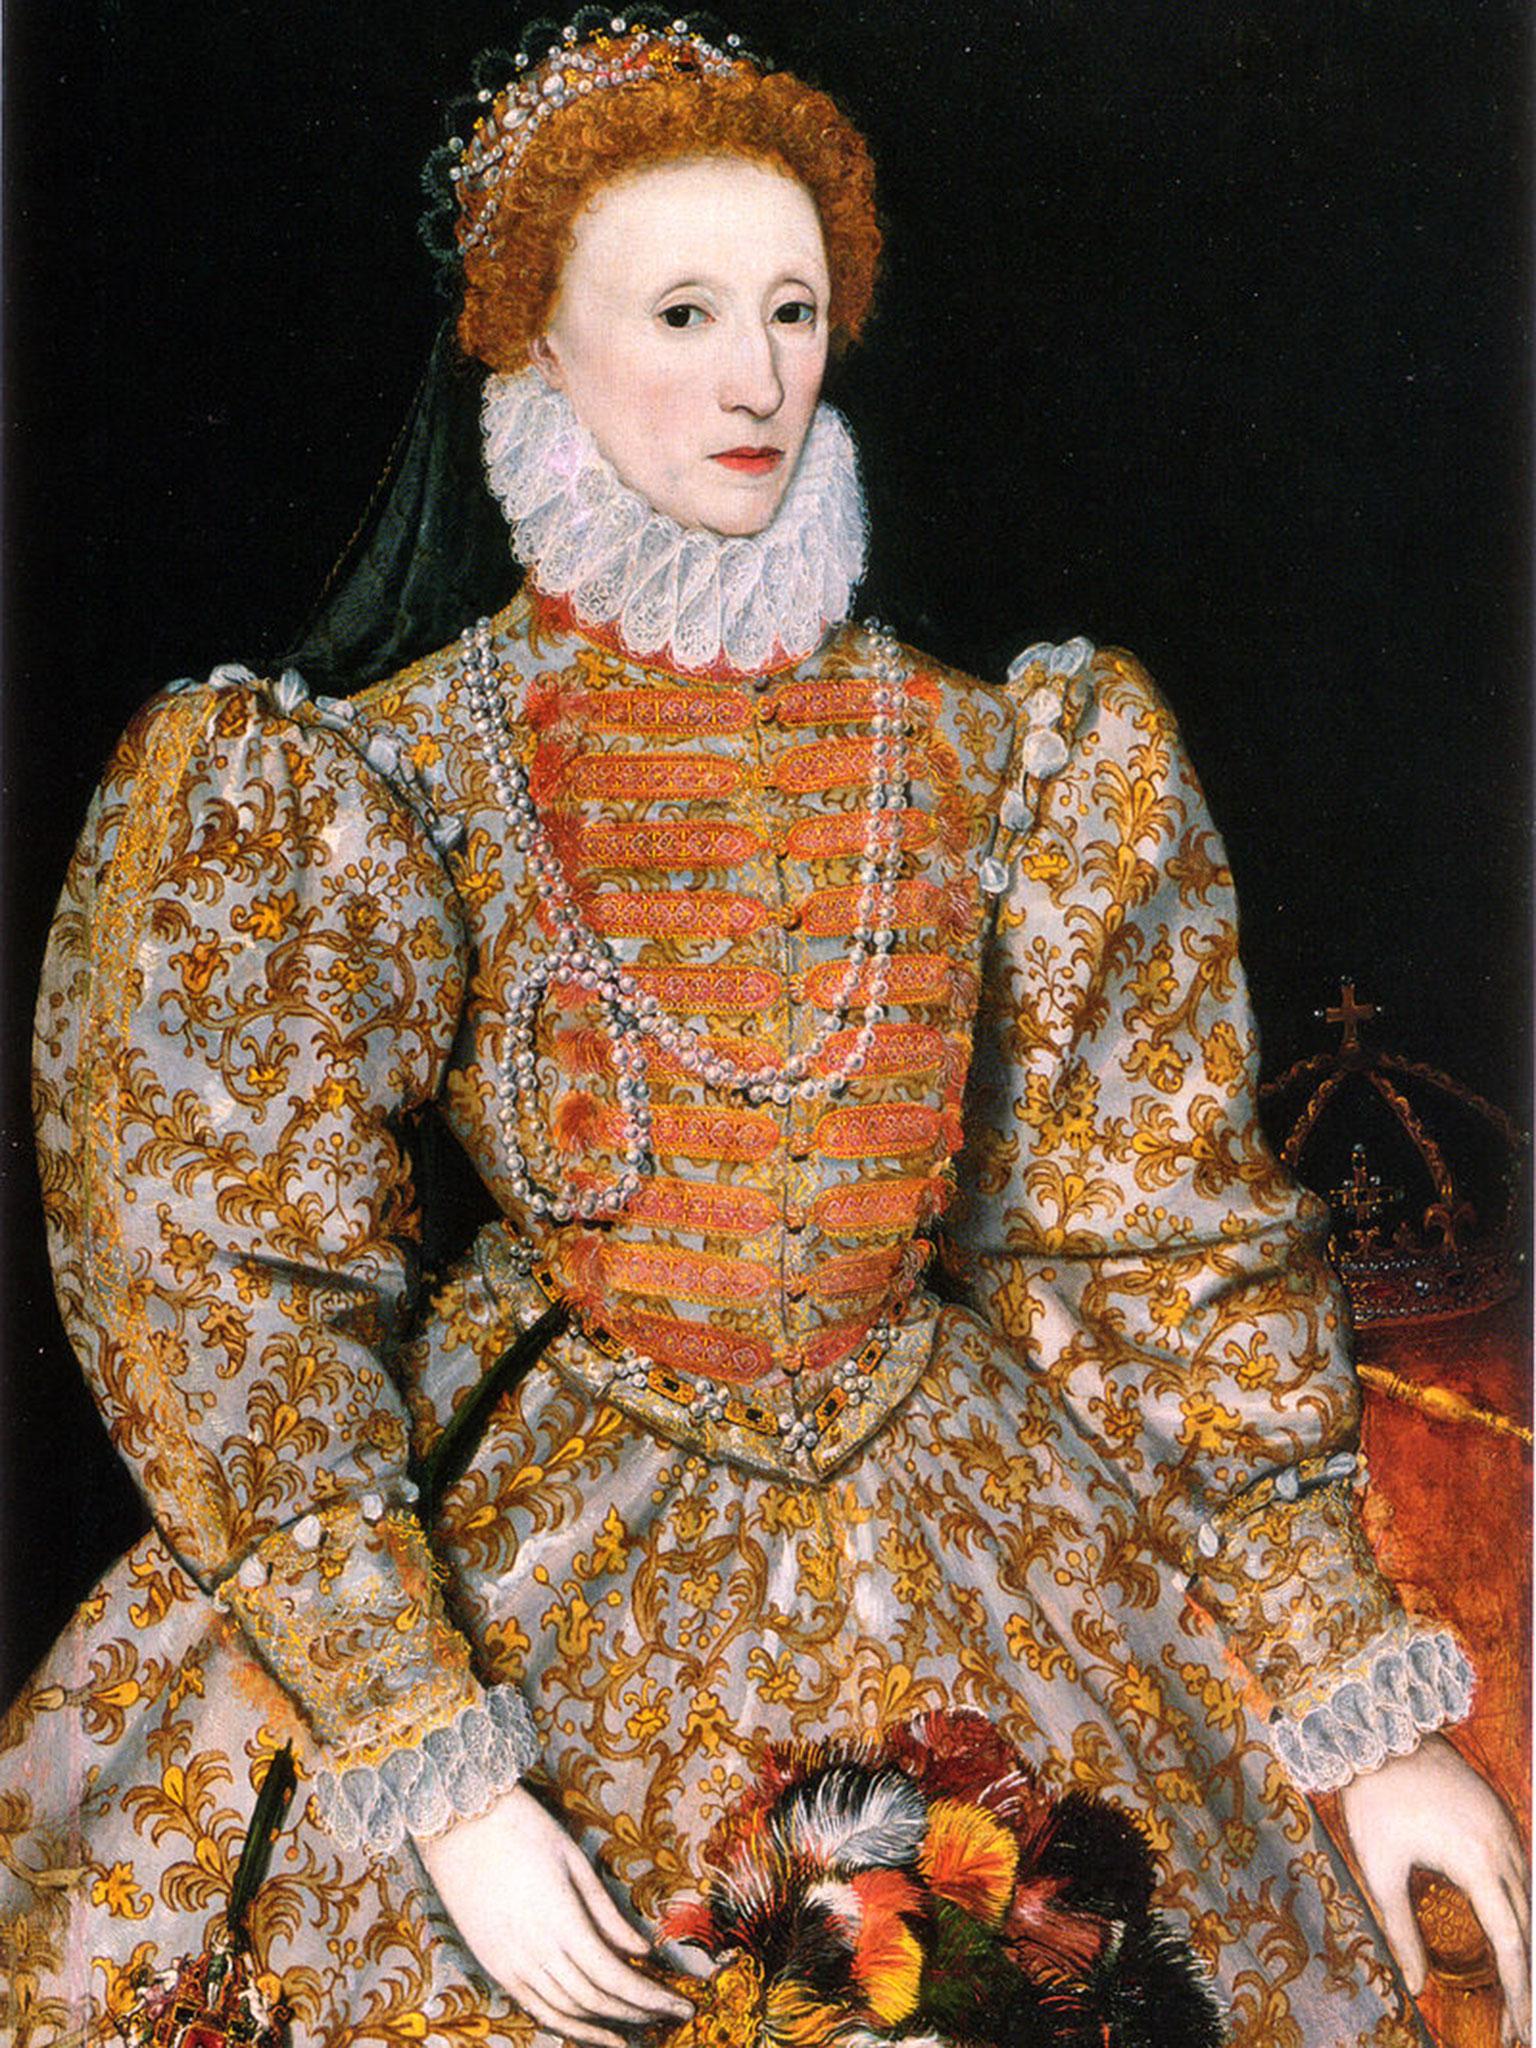 Queen Elizabeth I introduced sumptuary laws which restricted clothing according to social class